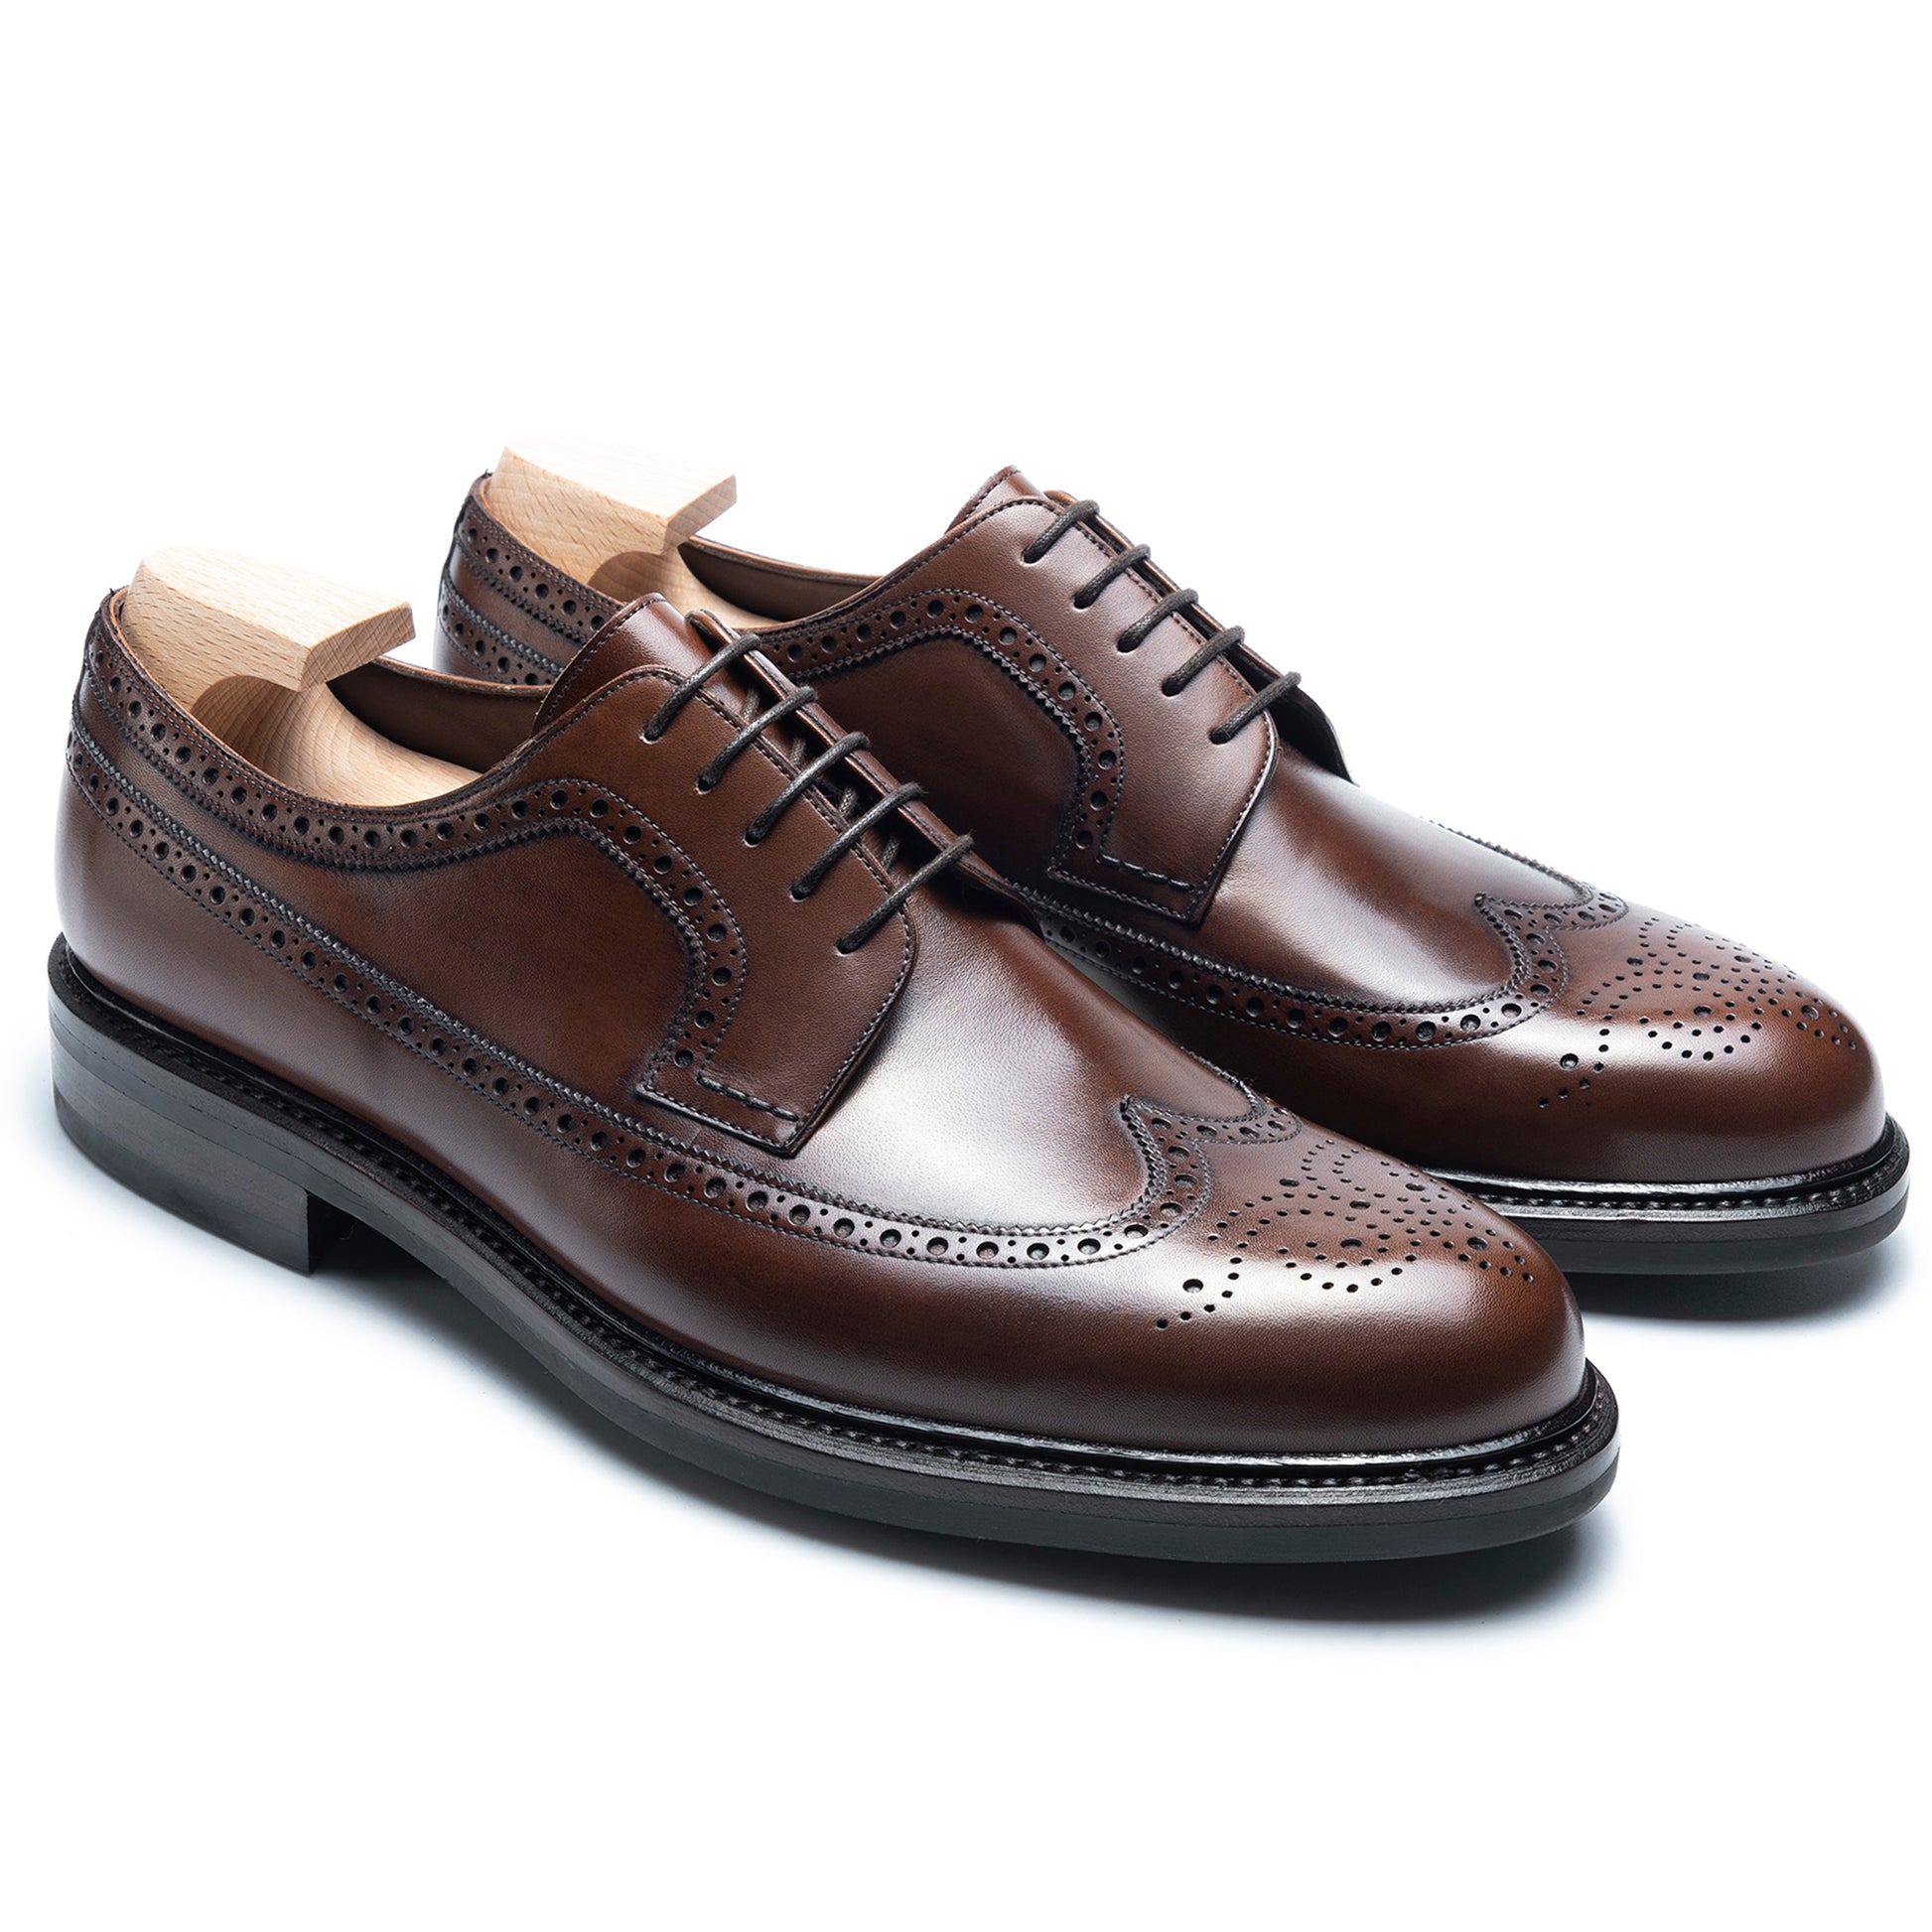 TLB Mallorca leather shoes 677 / MADISON / VEGANO BROWN